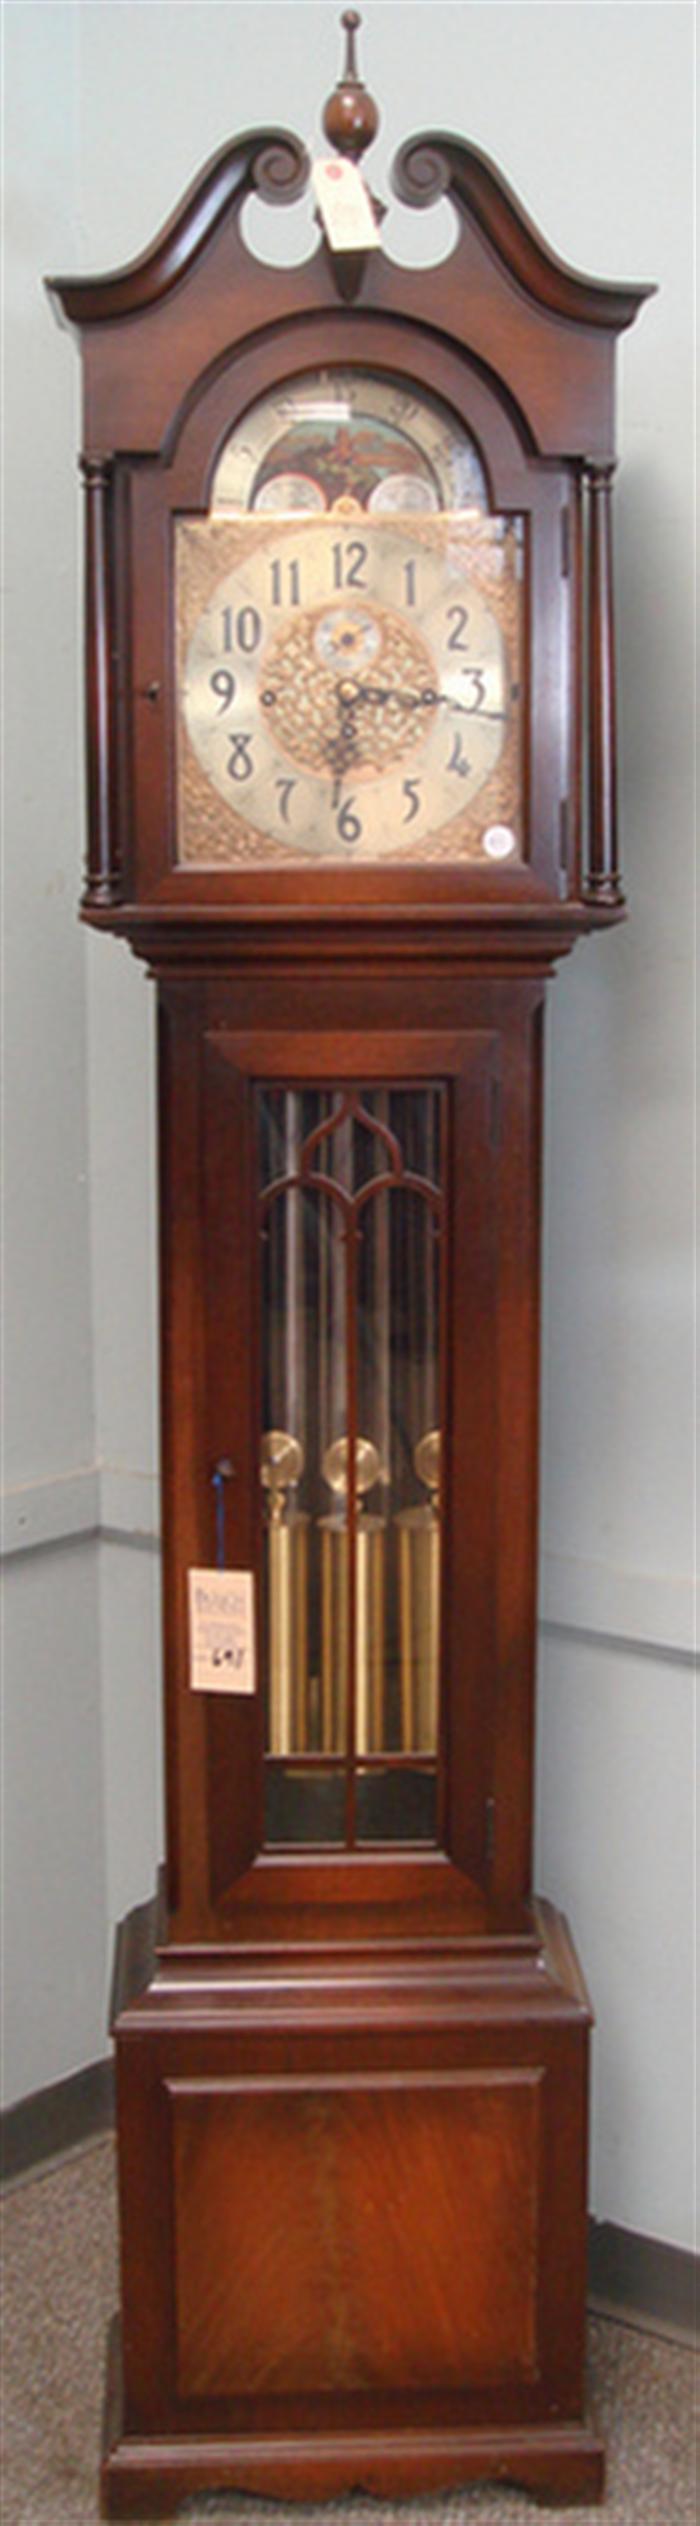 Herschedes 5 tube Westminster chiming